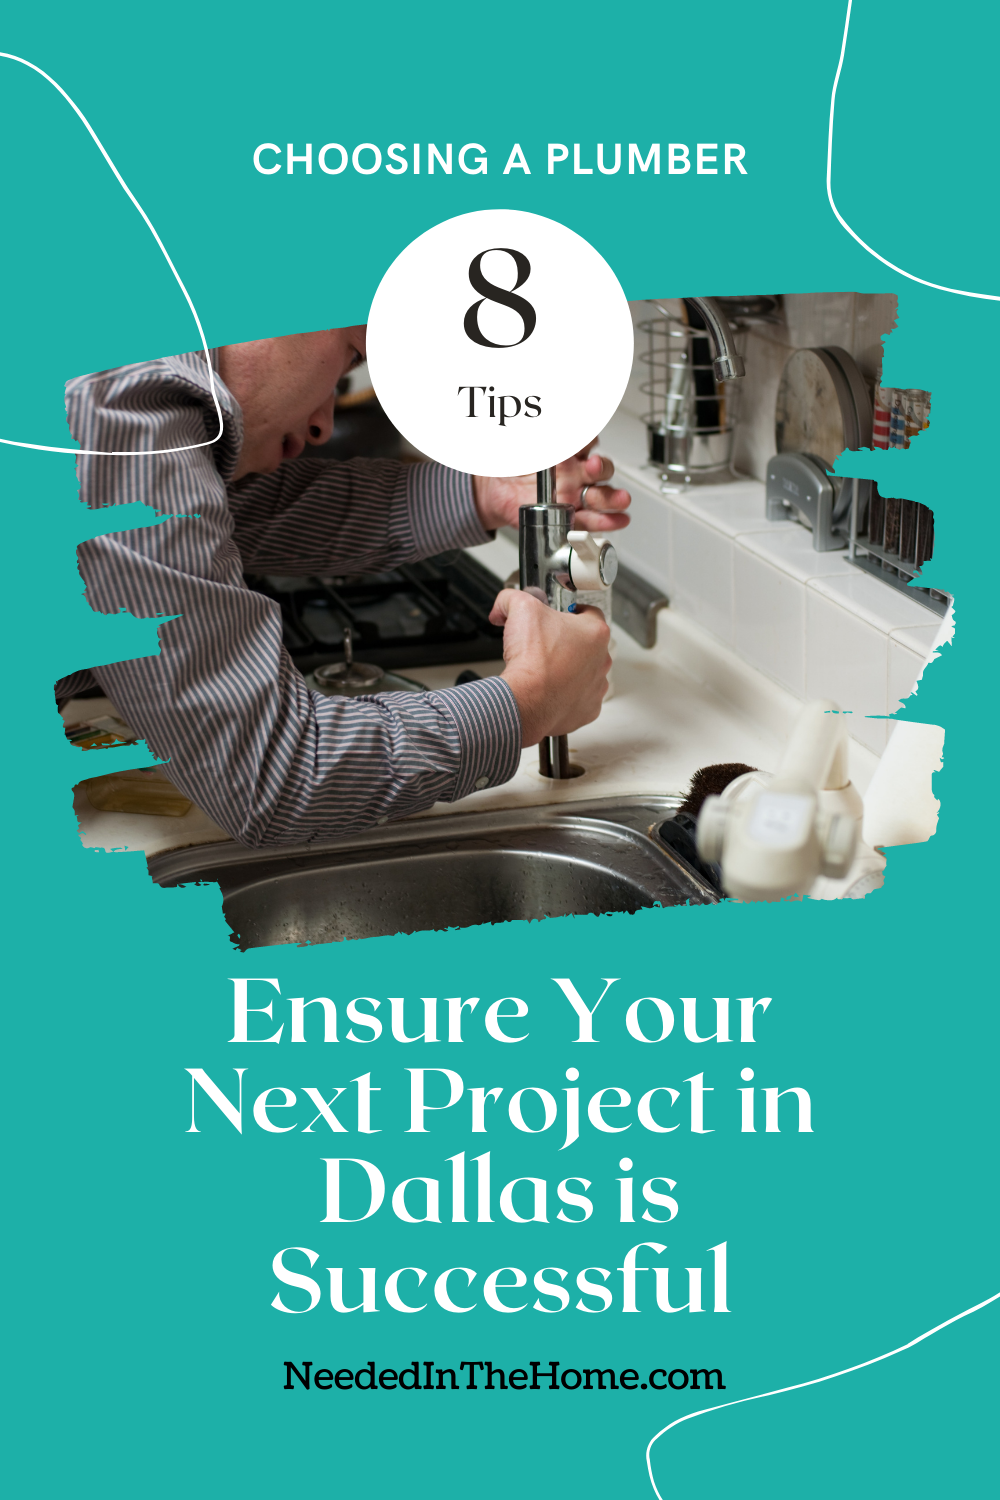 pinterest-pin-description choosing a plumber 8 tips ensure your next project in dallas is successful neededinthehome image of plumber in long sleeve work shirt fixing kitchen faucet